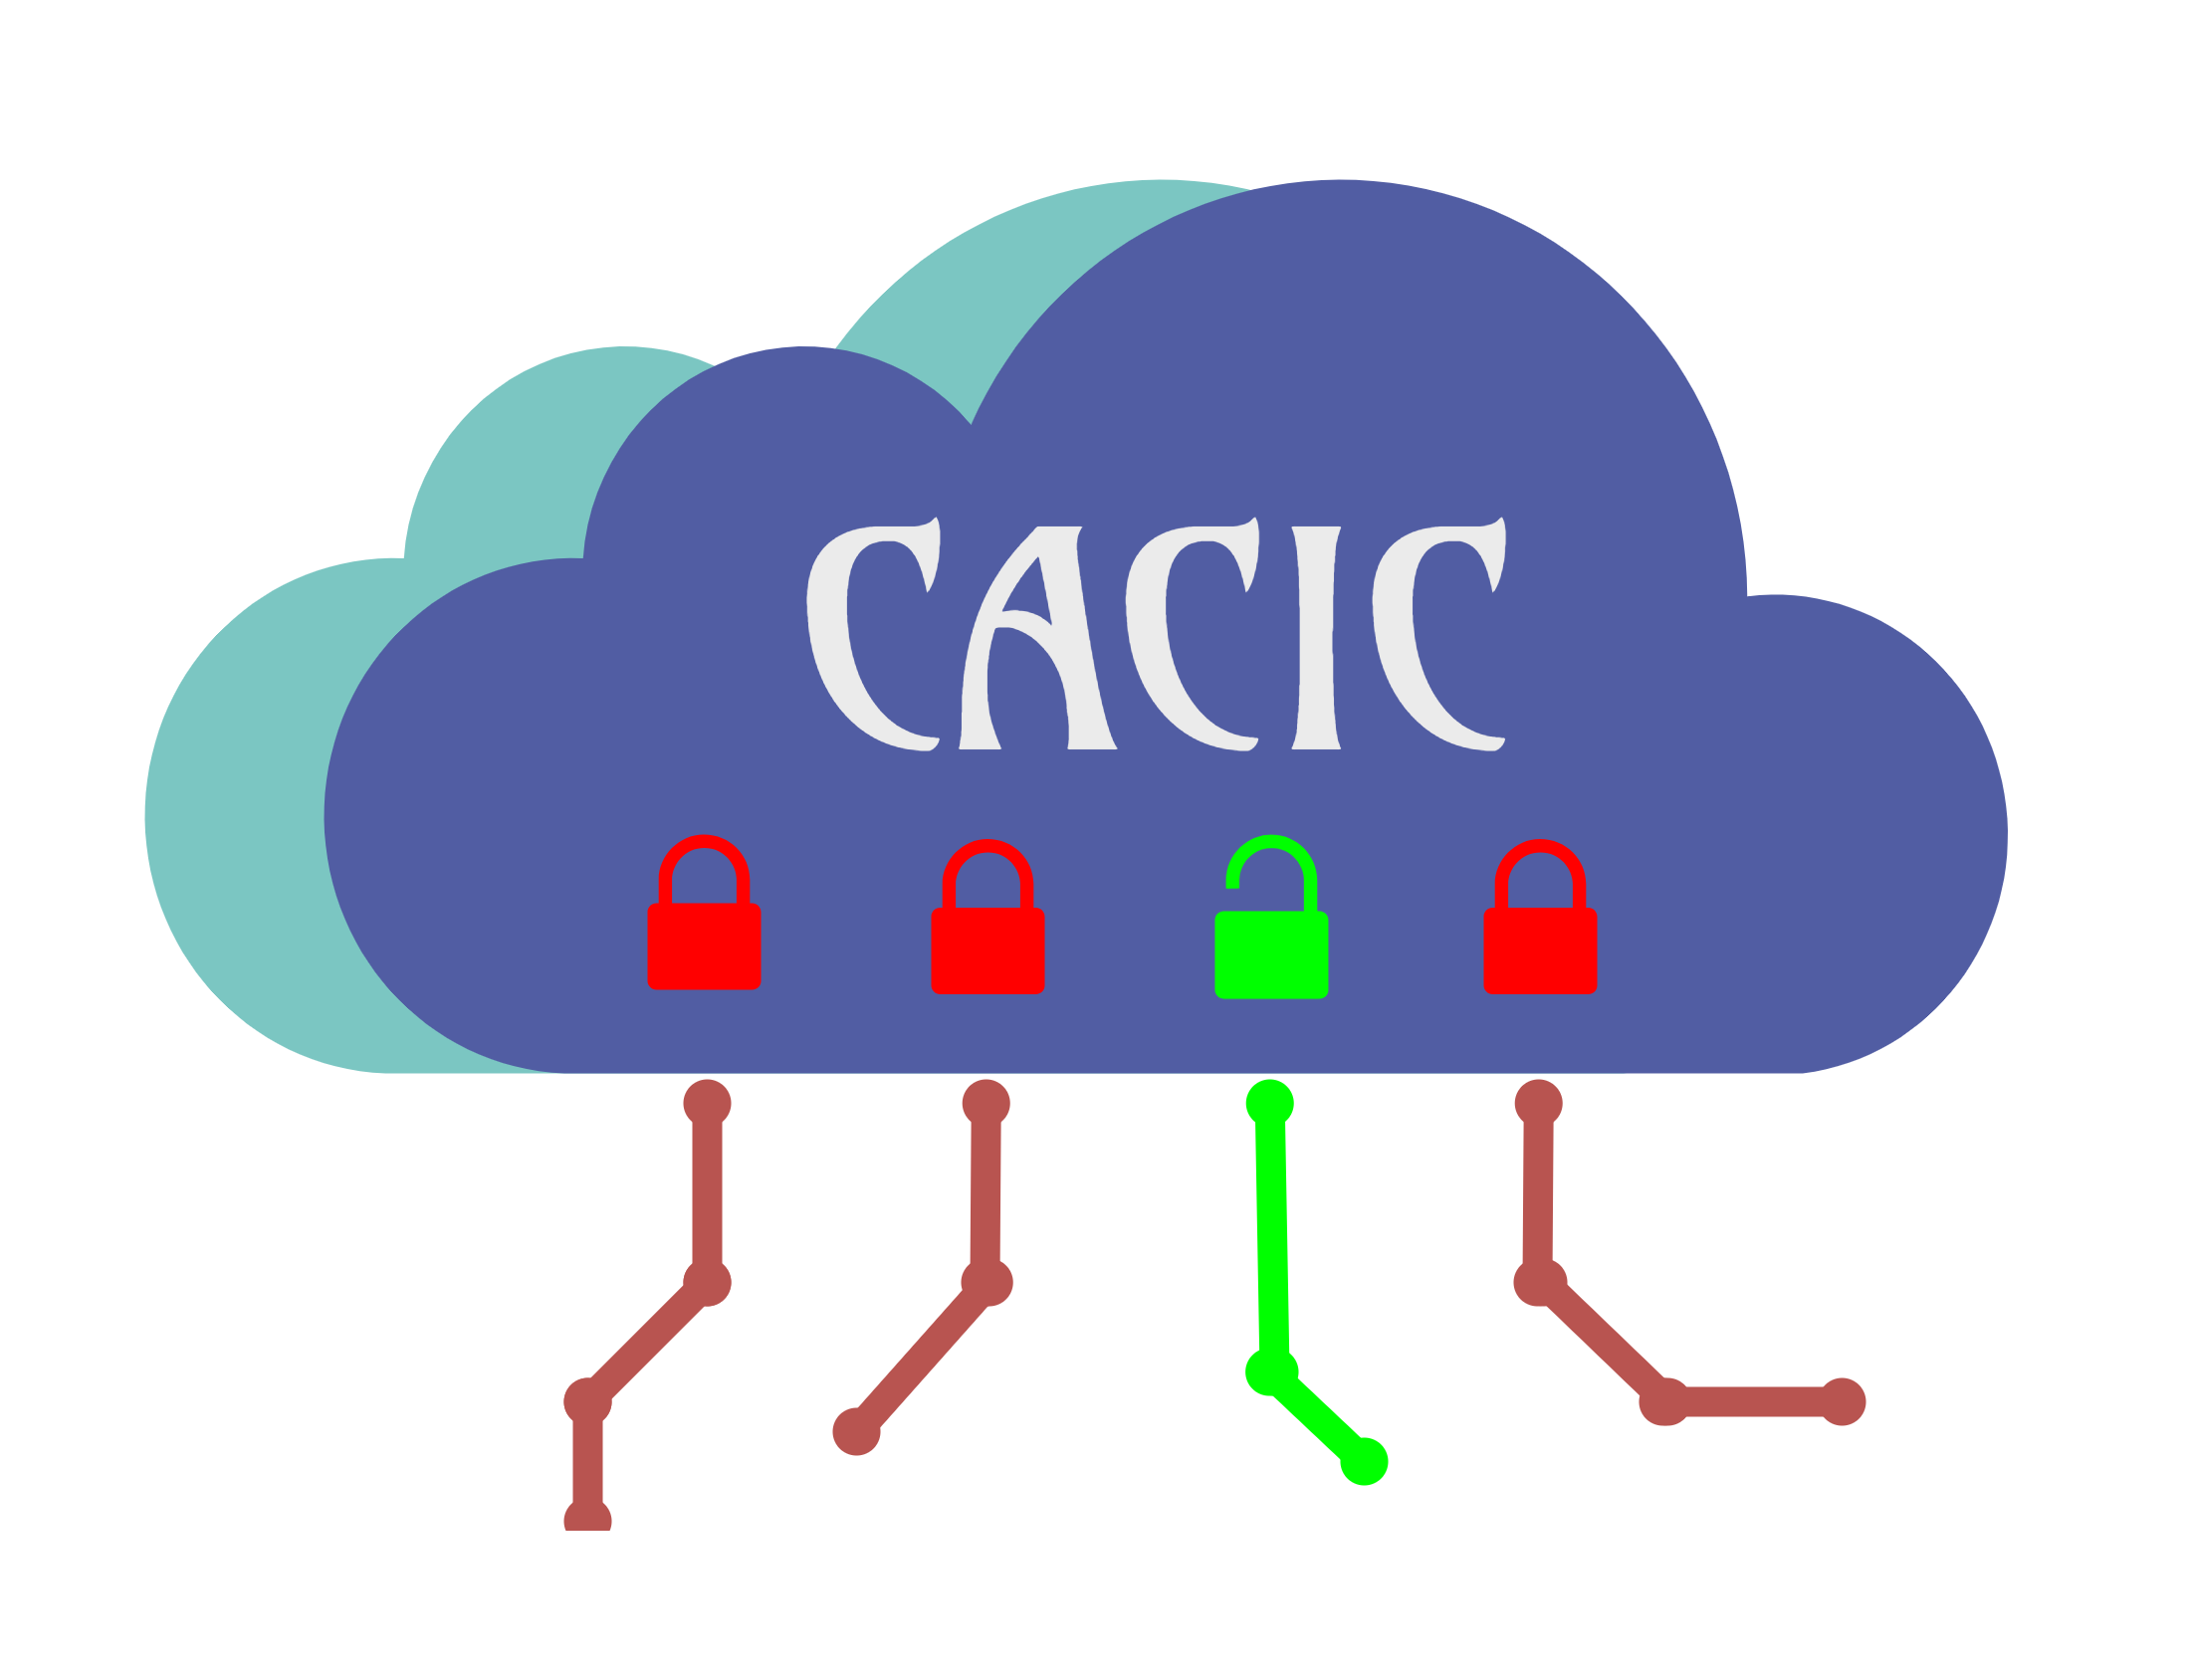 _images/logo_cacic_white.png